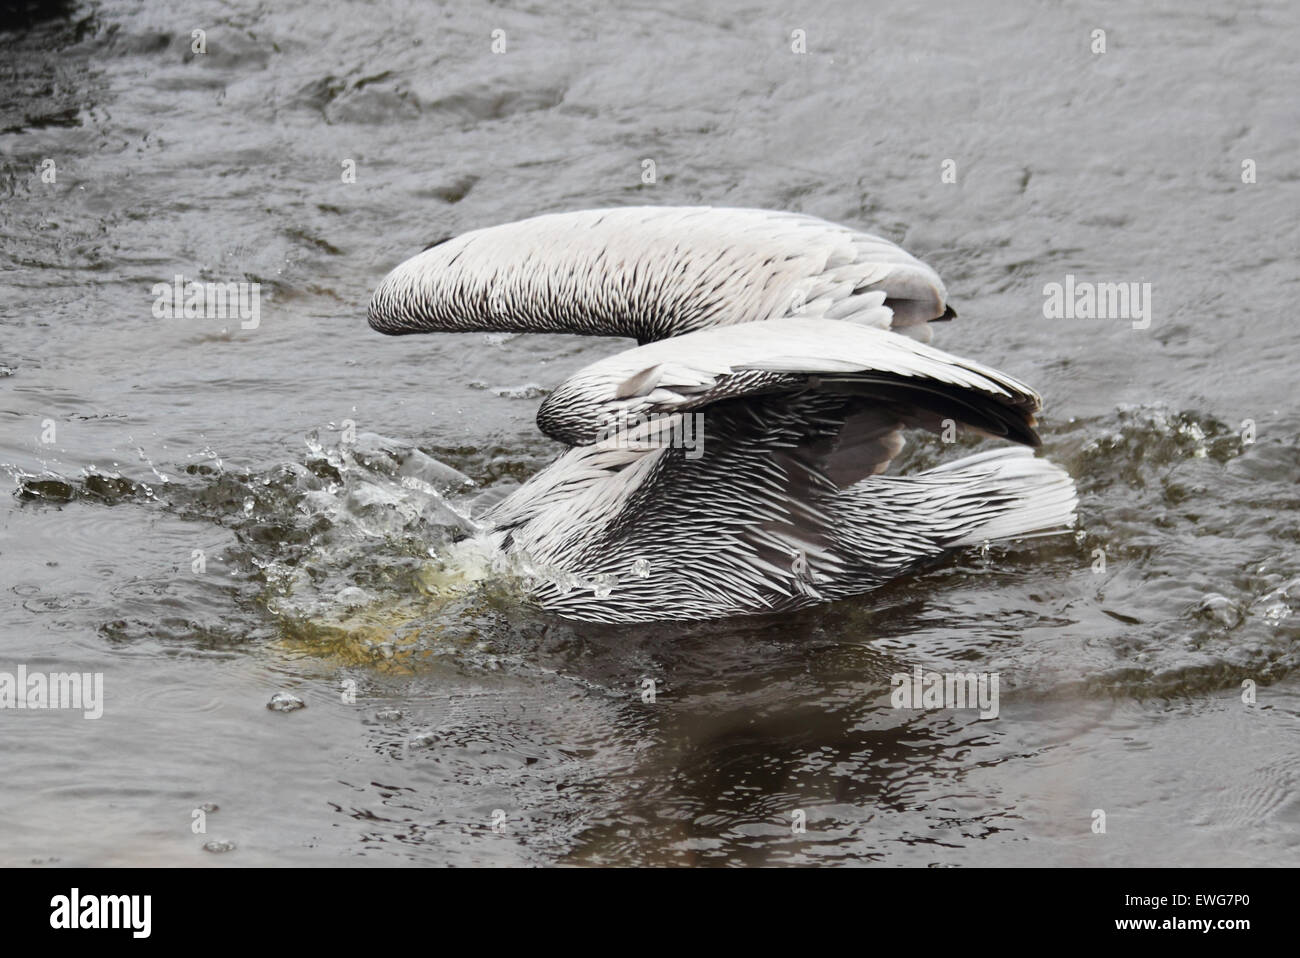 A Brown Pelican splashing through the water to feed in a coastal estuary. Stock Photo